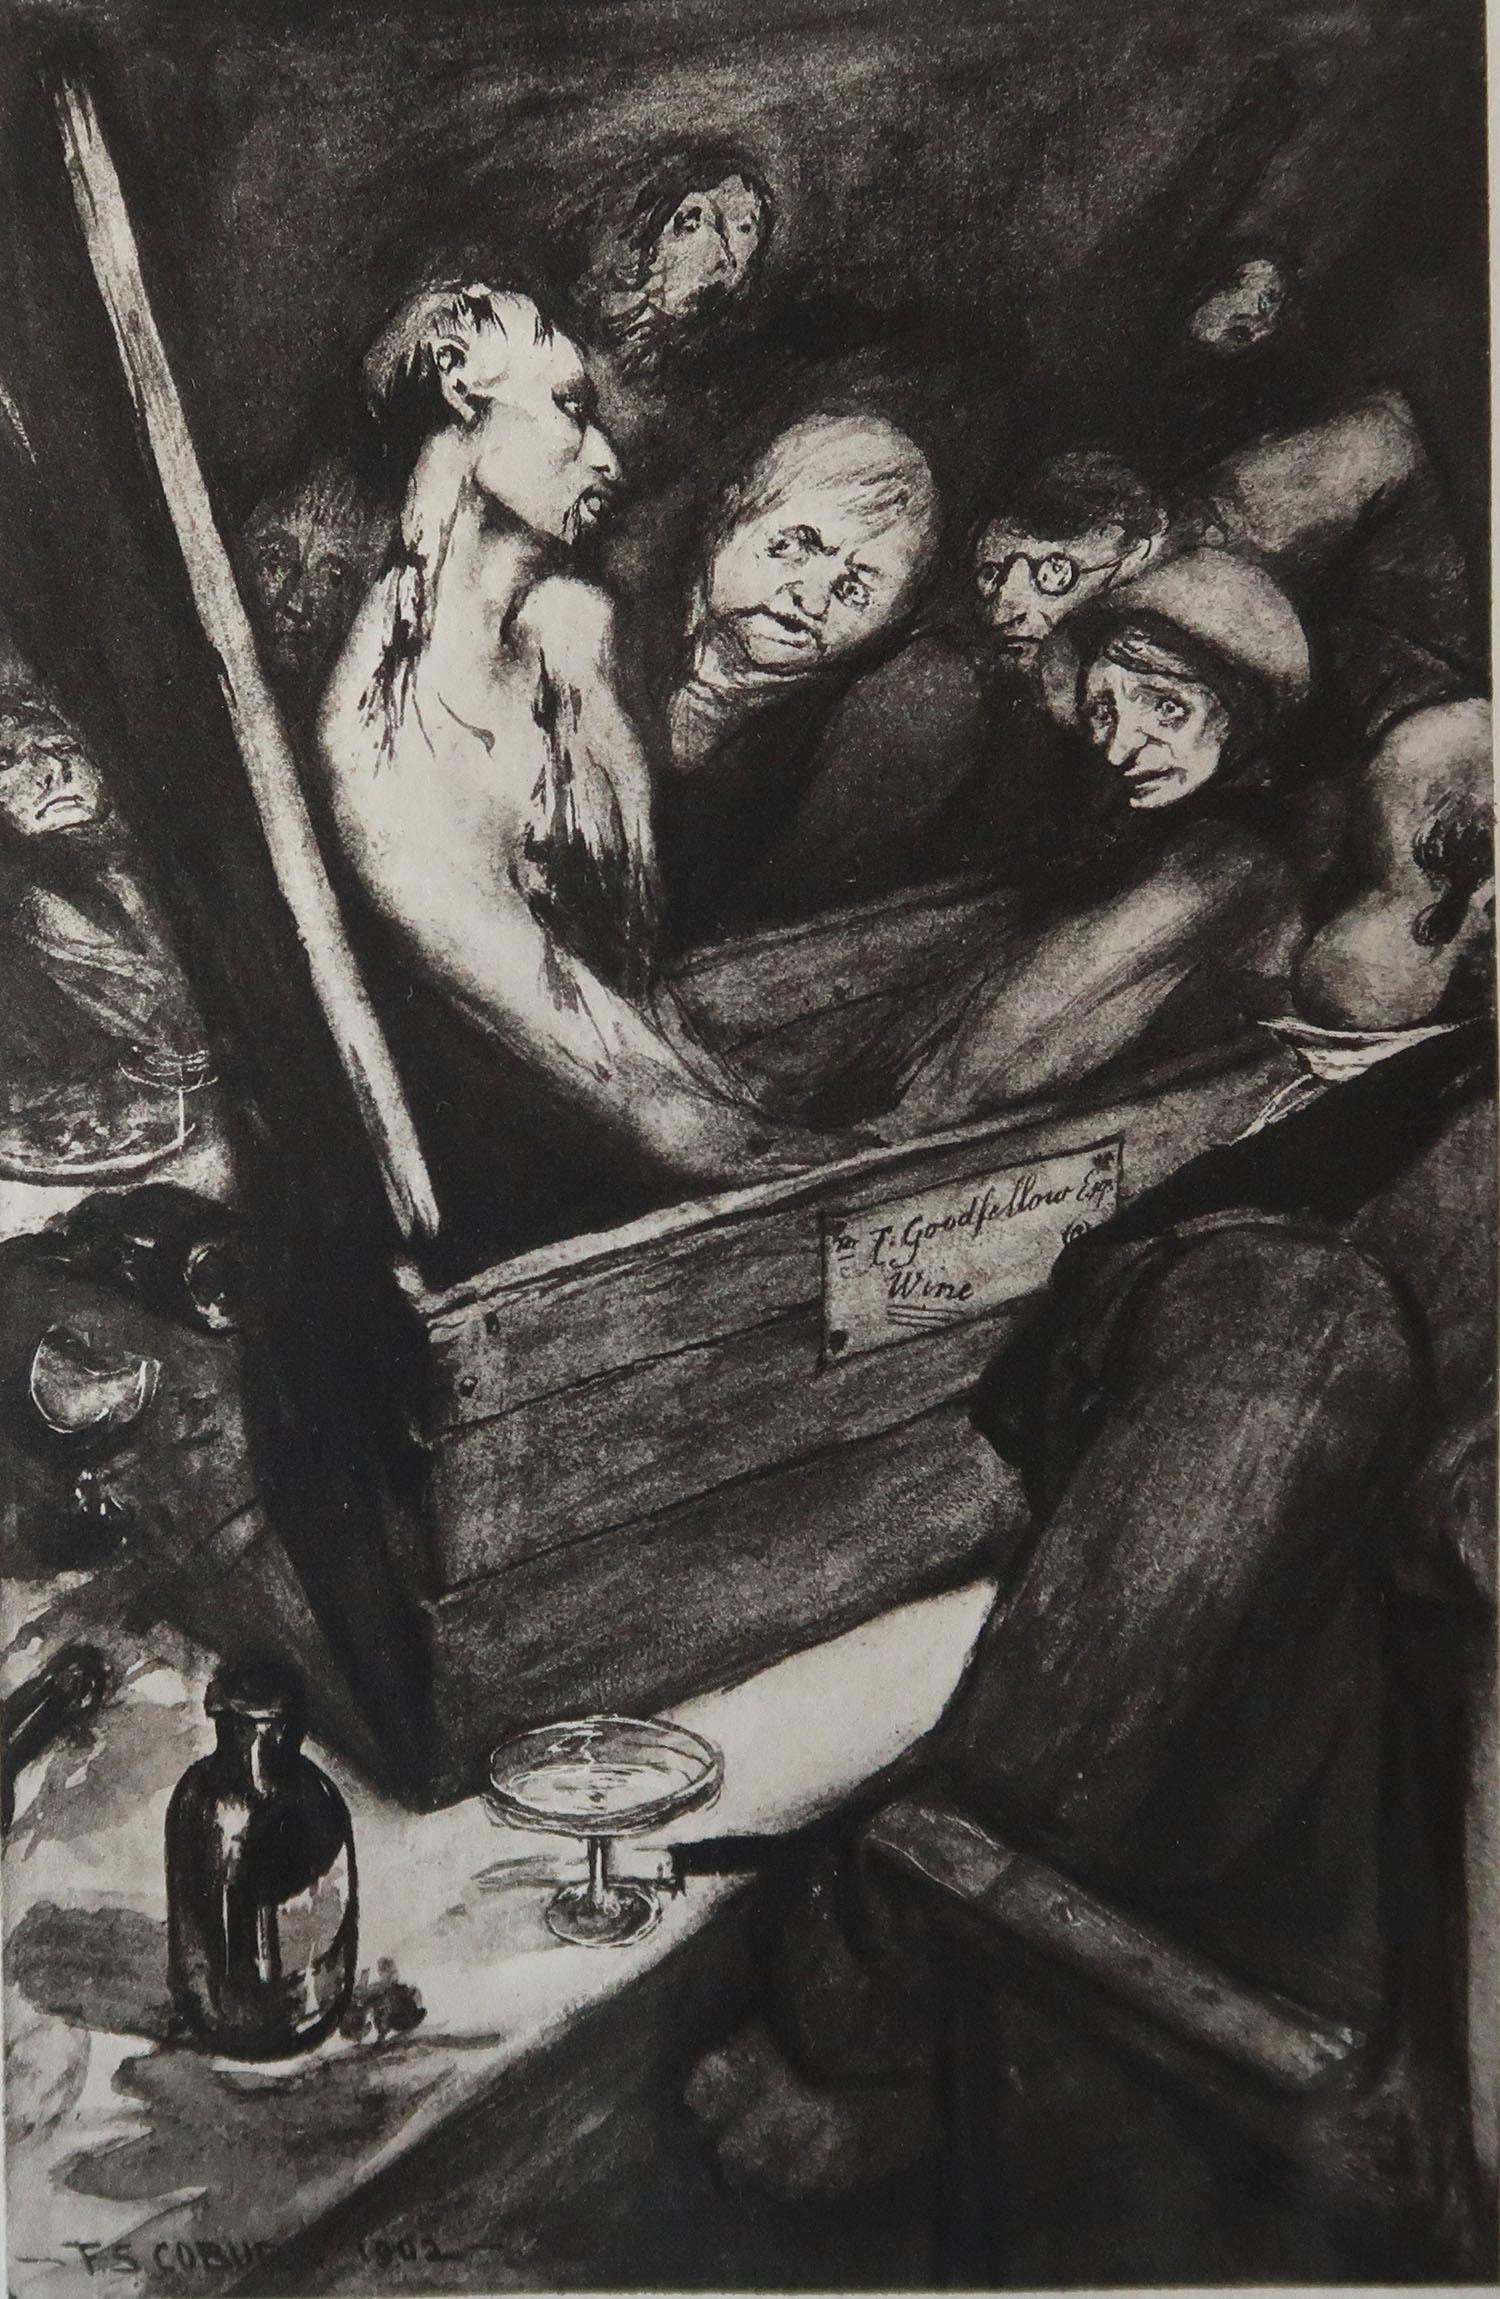 Sensational image by Frederick Simpson Coburn.

In the style of one of my favourite artists, Goya.

Photogravure.

Limited edition of 300. This is No. 84.

From The Complete Works of Edgar Allen Poe.

Published by Putnam, New York.